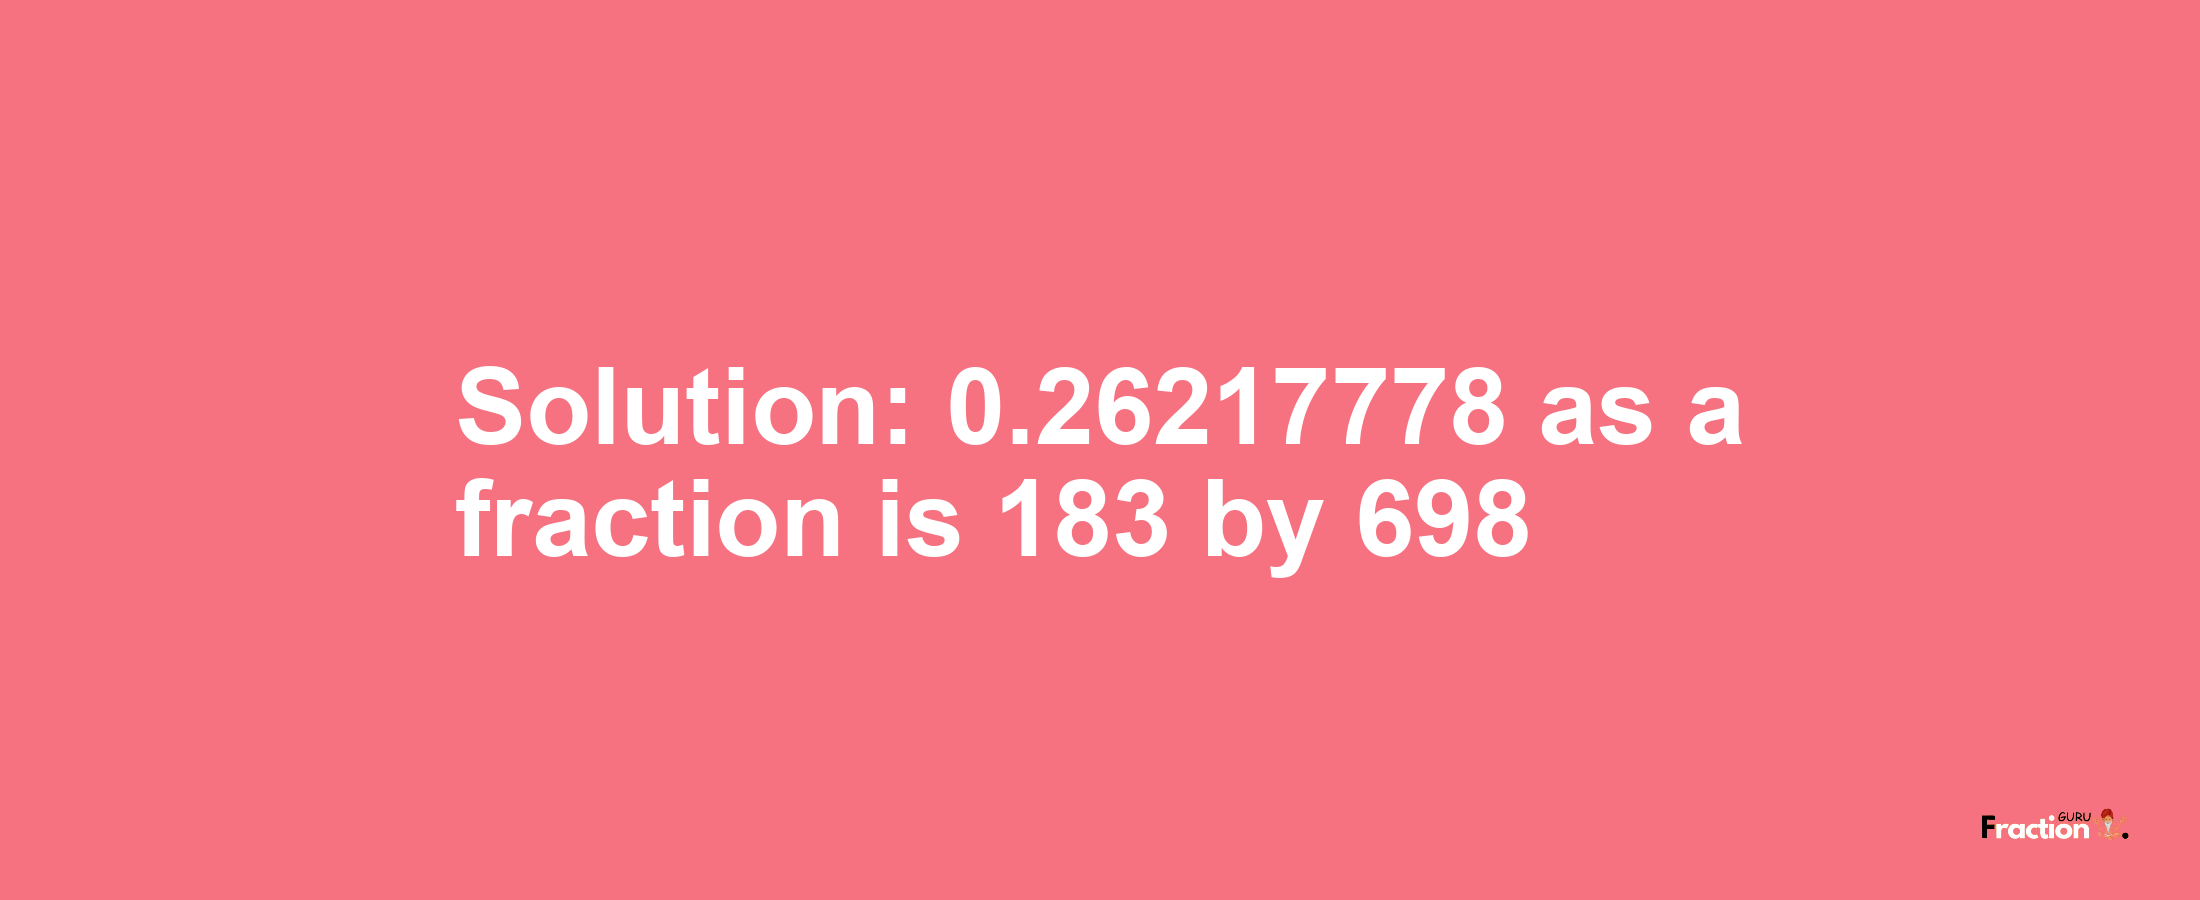 Solution:0.26217778 as a fraction is 183/698